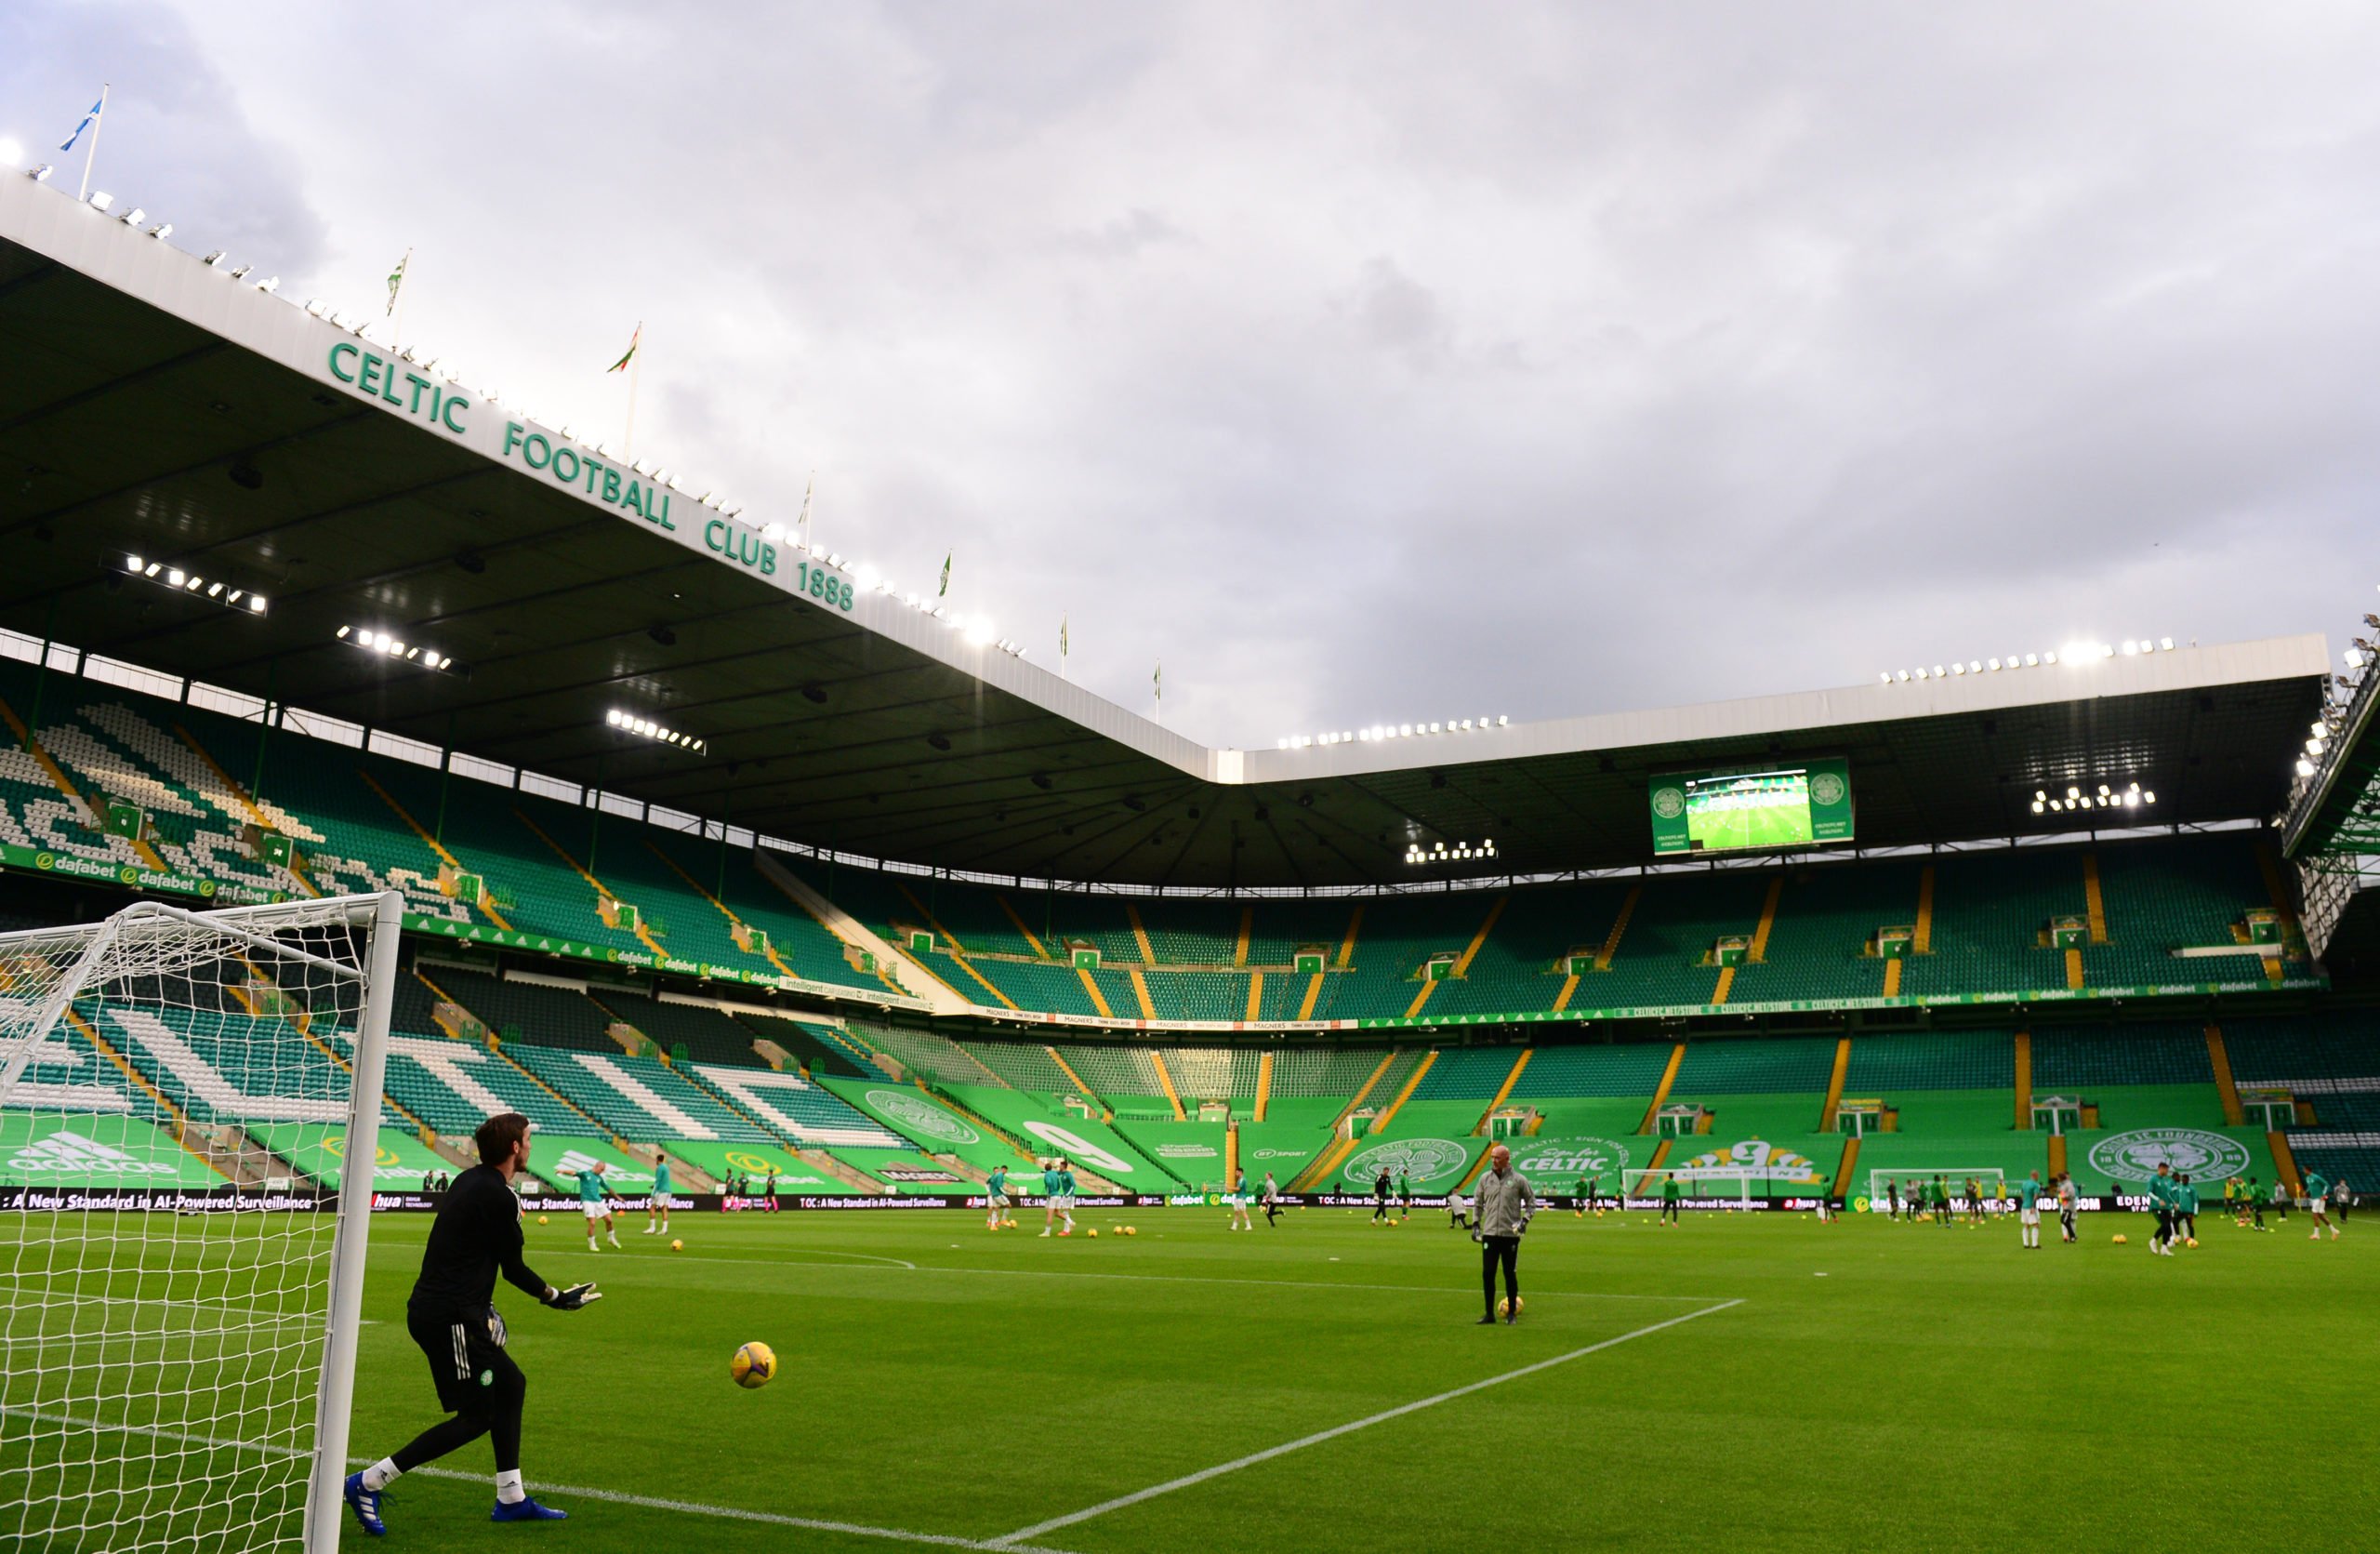 Celtic should limit loan transfers this summer ahead of crucial rebuild